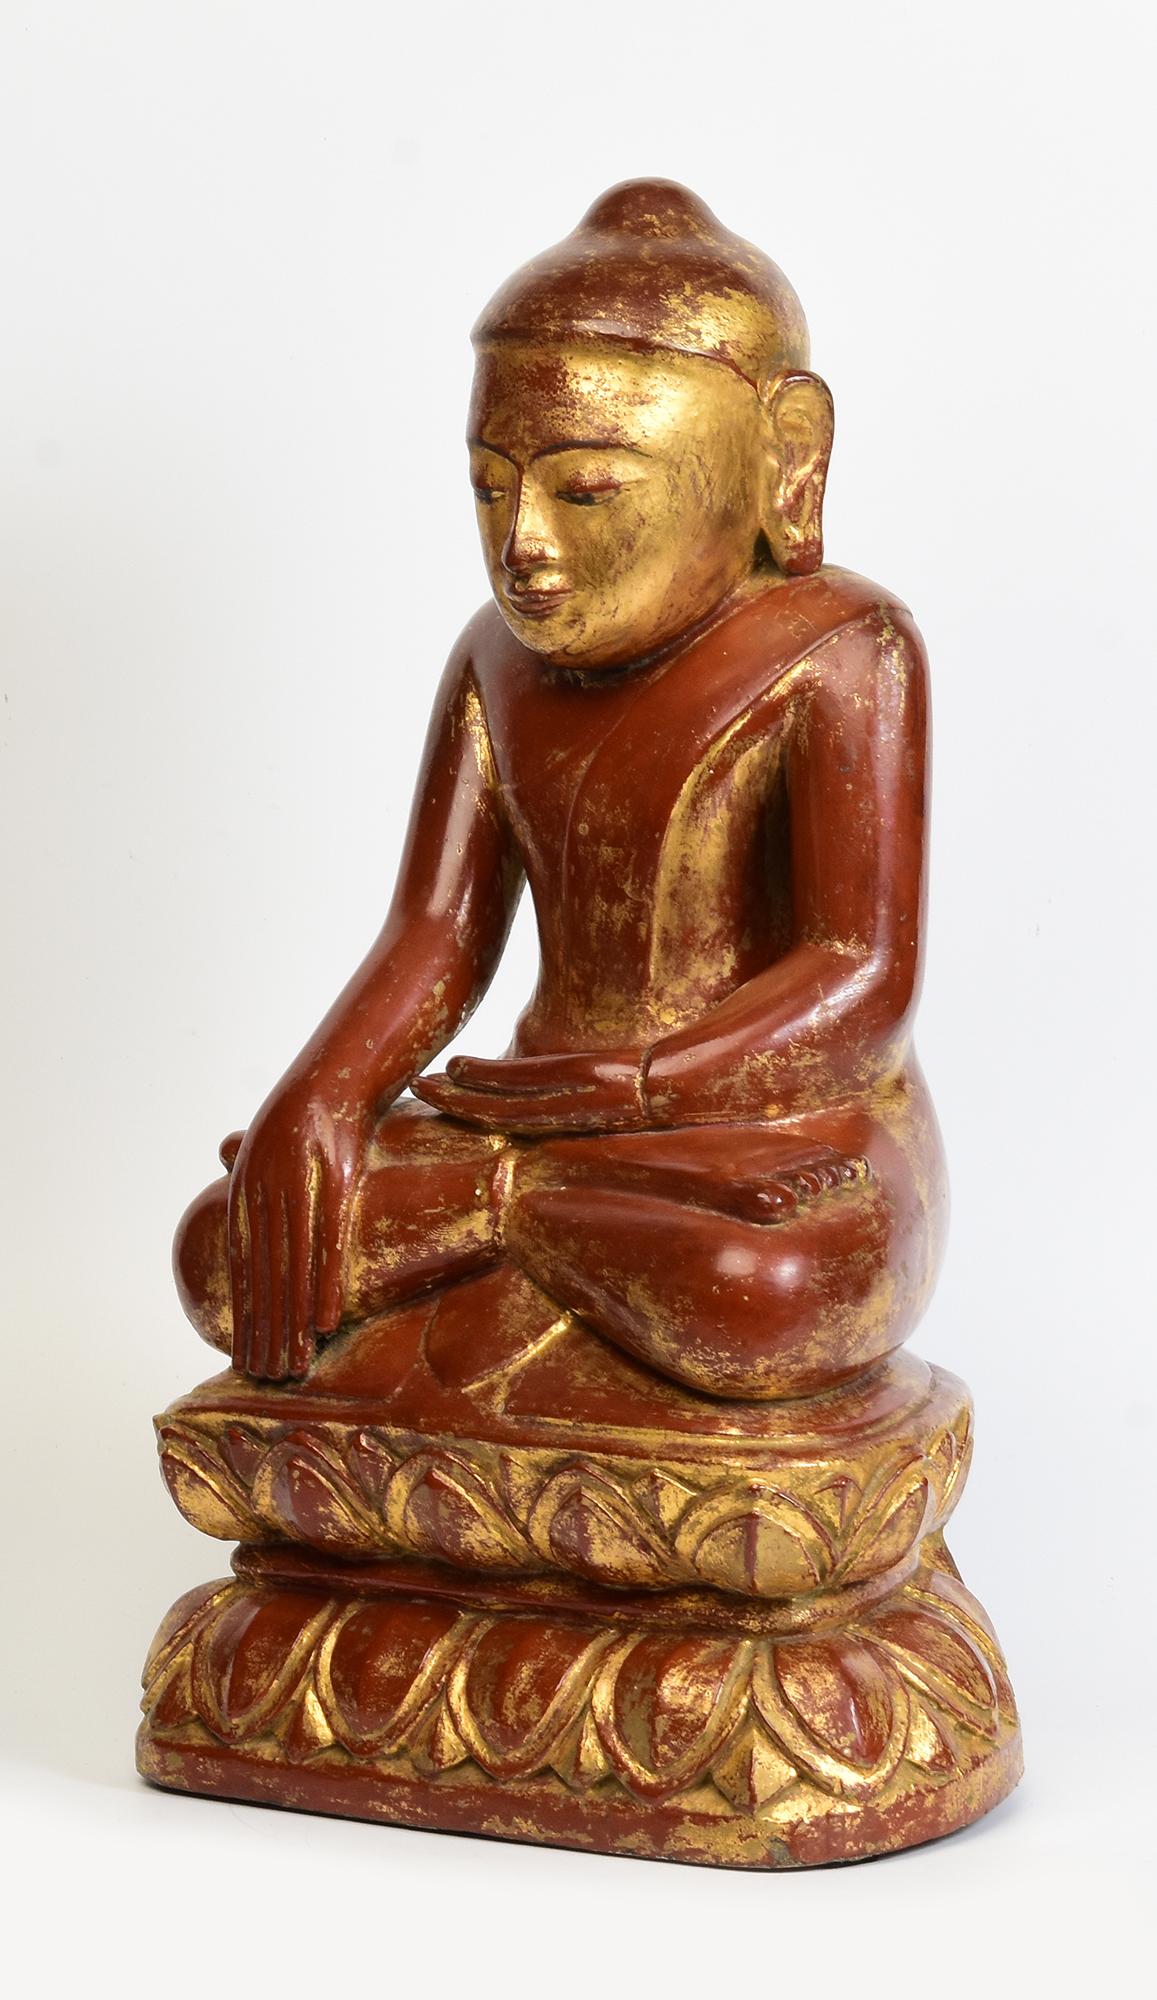 16th C., Ava, Rare Antique Burmese Wooden Seated Buddha on Double Lotus Base For Sale 1